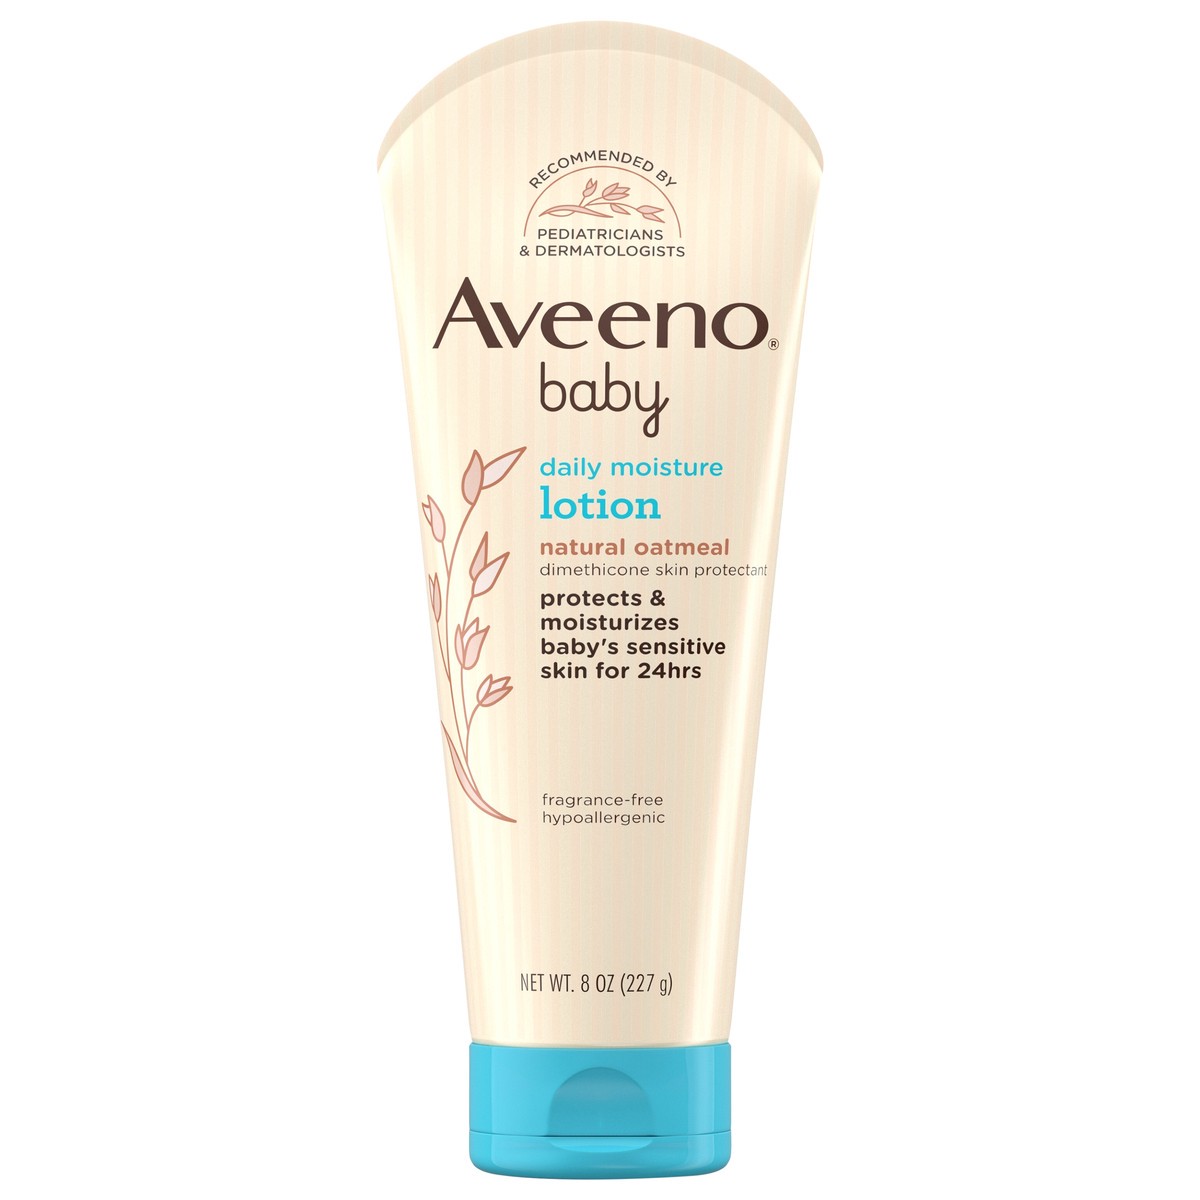 slide 1 of 7, Aveeno Daily Moisture Body Lotion for Delicate Skin, Natural Colloidal Oatmeal & Dimethicone, Hypoallergenic Moisturizing Baby Lotion, Fragrance-, Phthalate- & Paraben-Free, 8 fl. oz, 8 oz